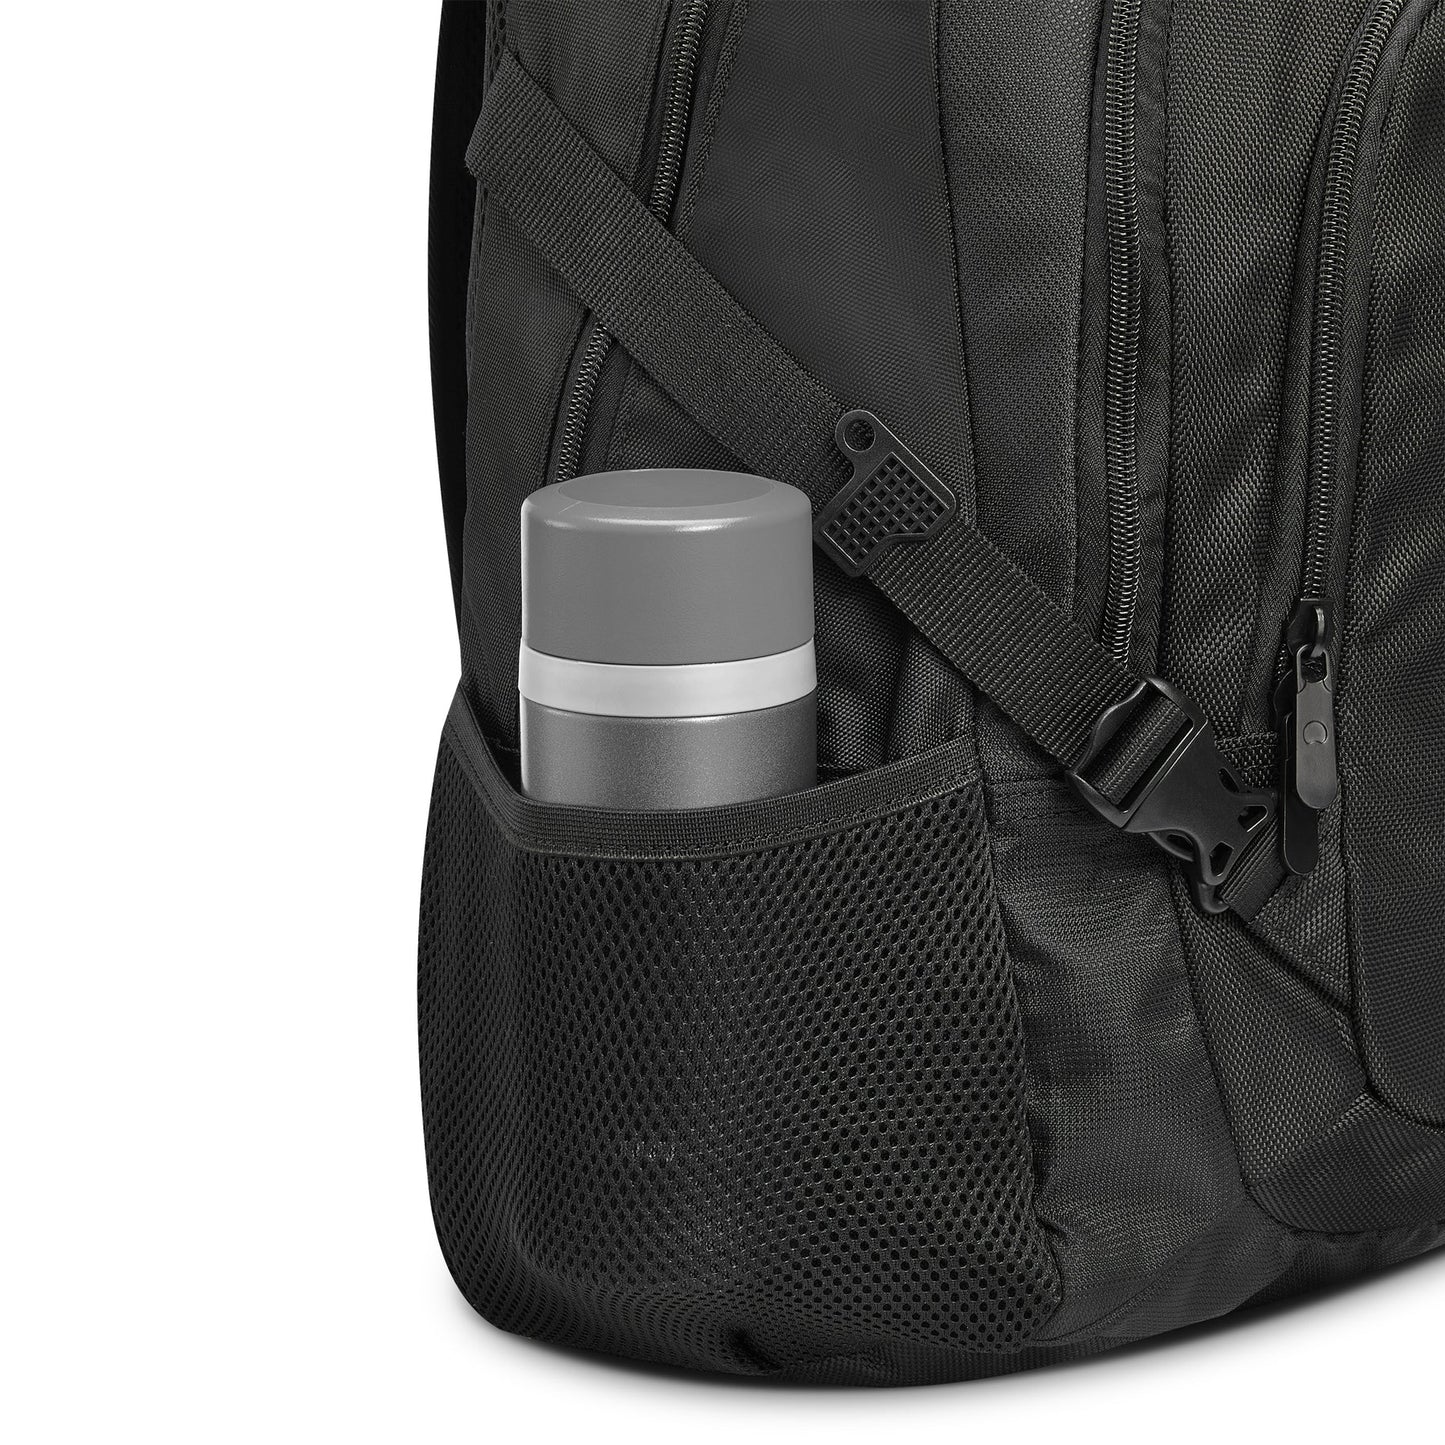 BAG - Backpack (PC Protection 15.6")